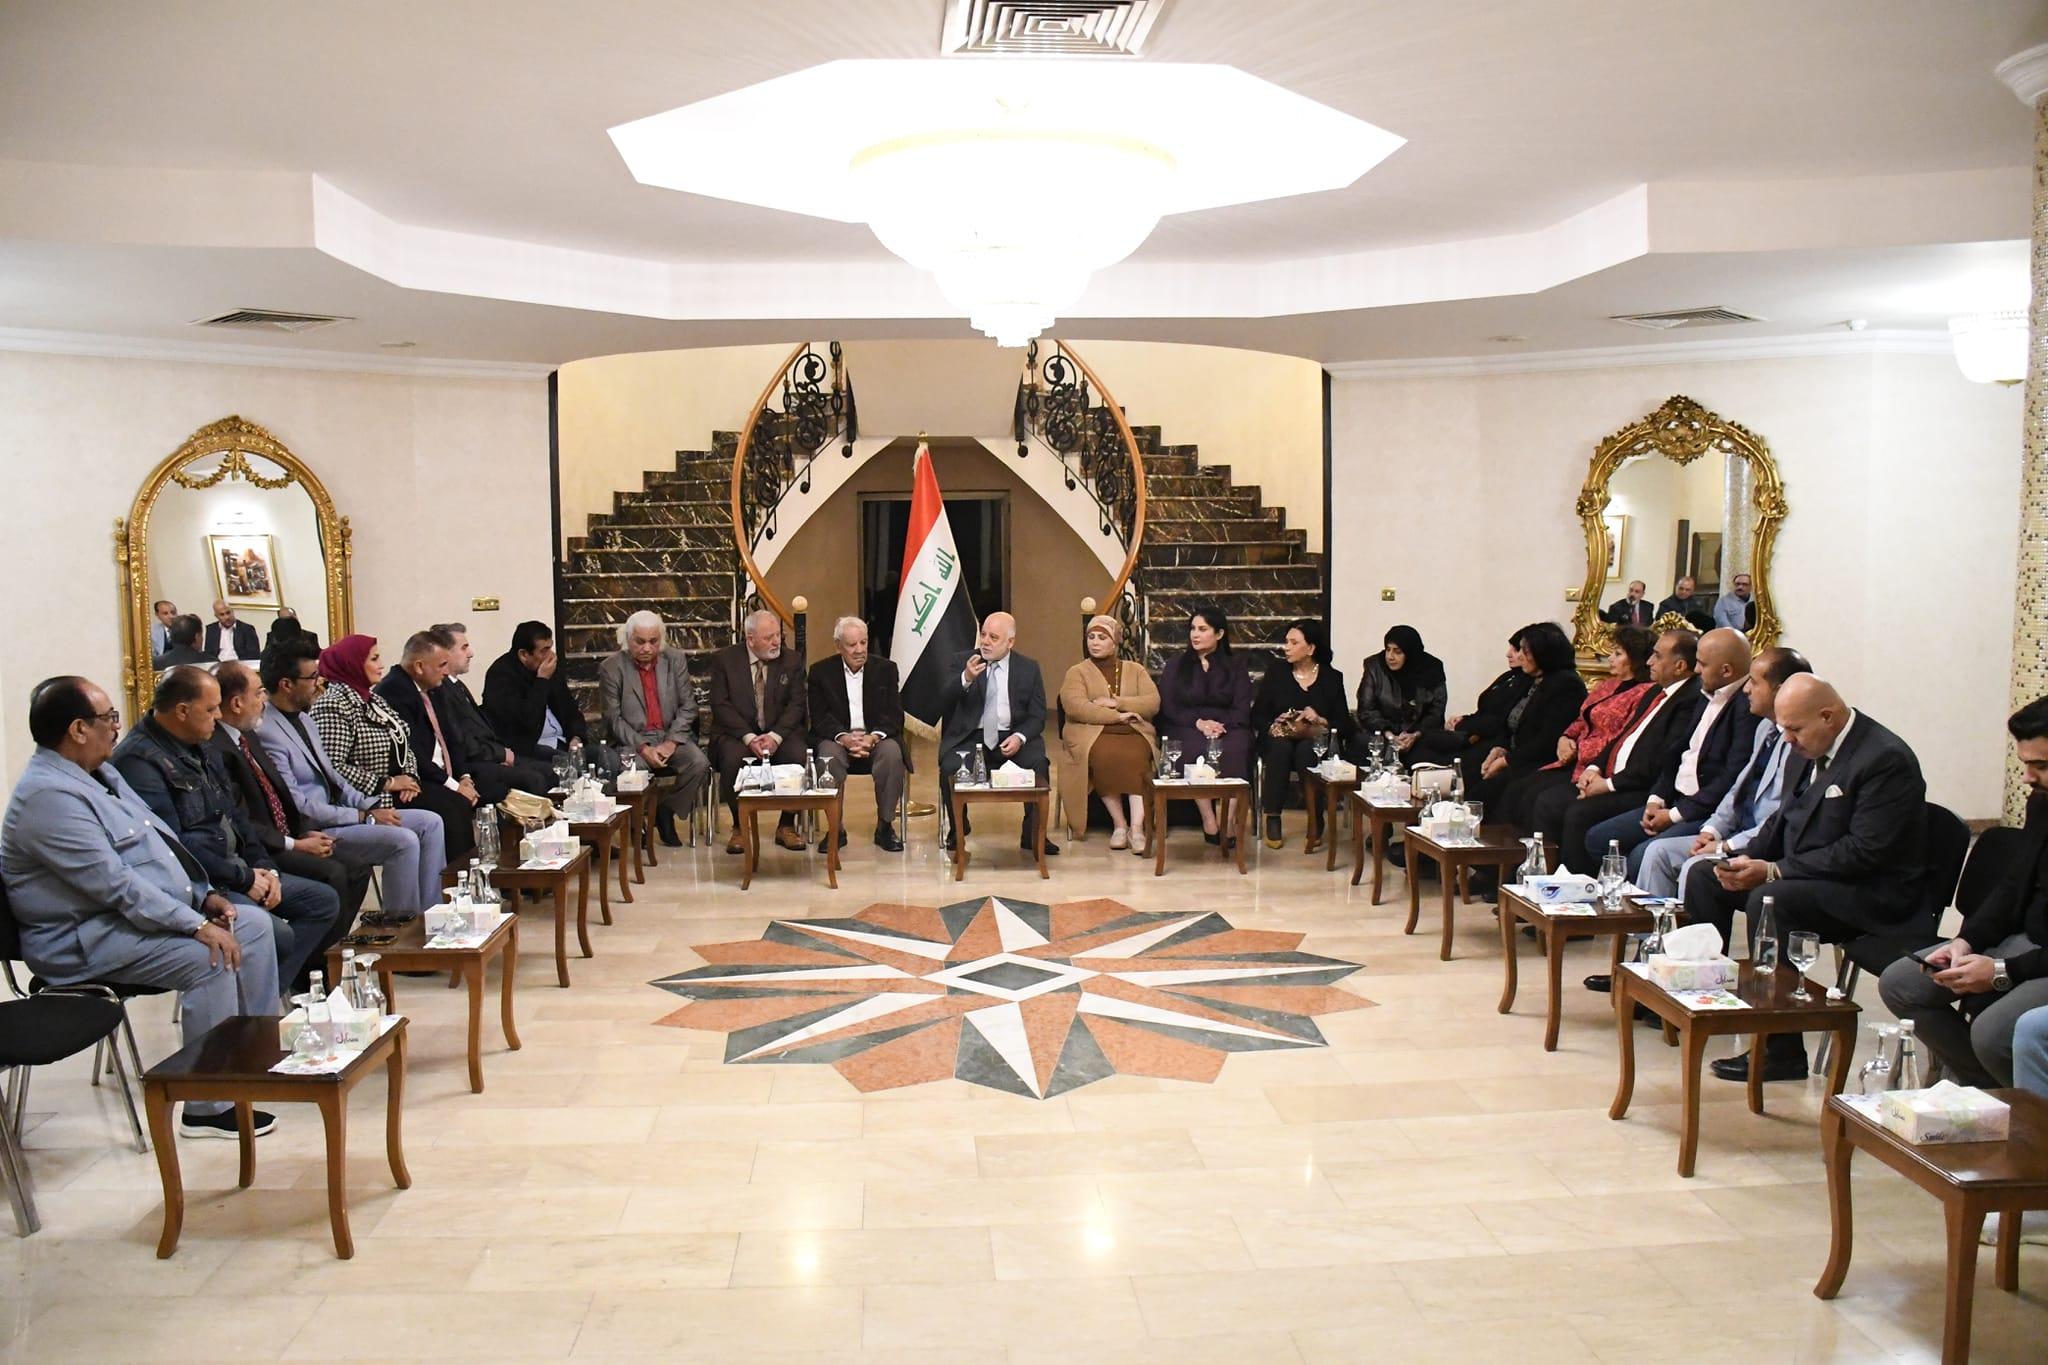 Dr. Al-Abadi hosts an elite group of artists and confirms the positive impact of art on peace and co